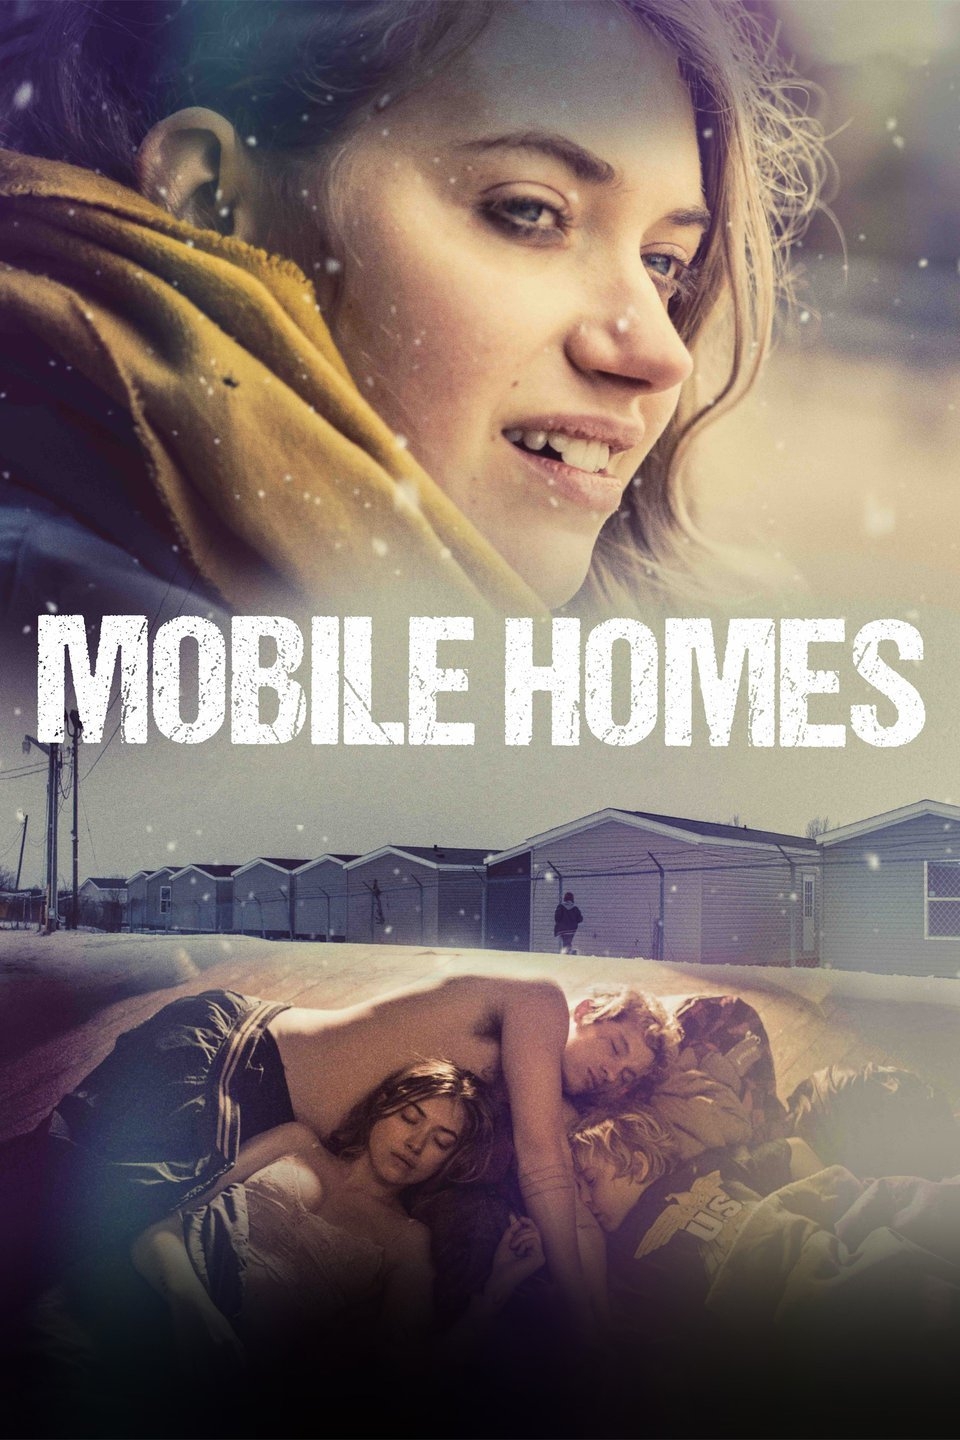 "Mobile Homes" Poster Courtesy of Laemmle